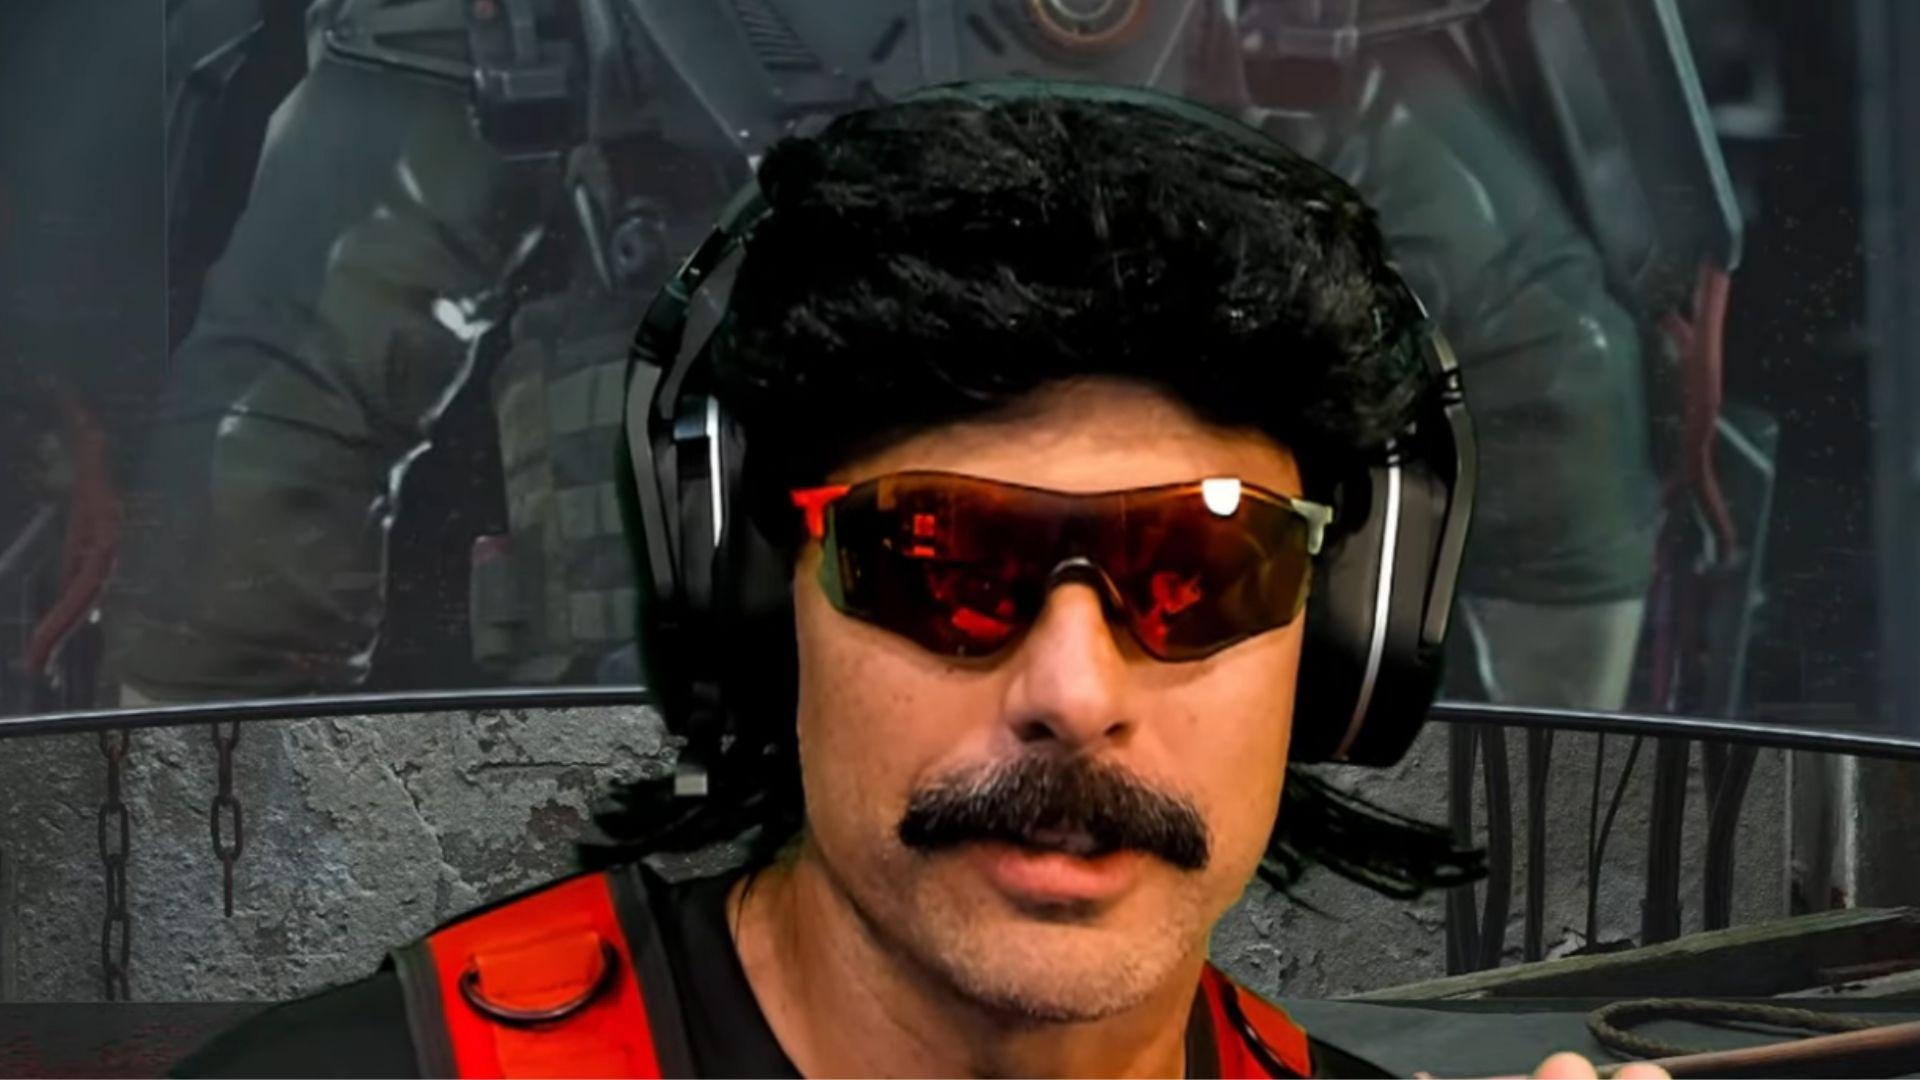 Dr Disrespect sat talking to camera in front of Advanced Warfare character